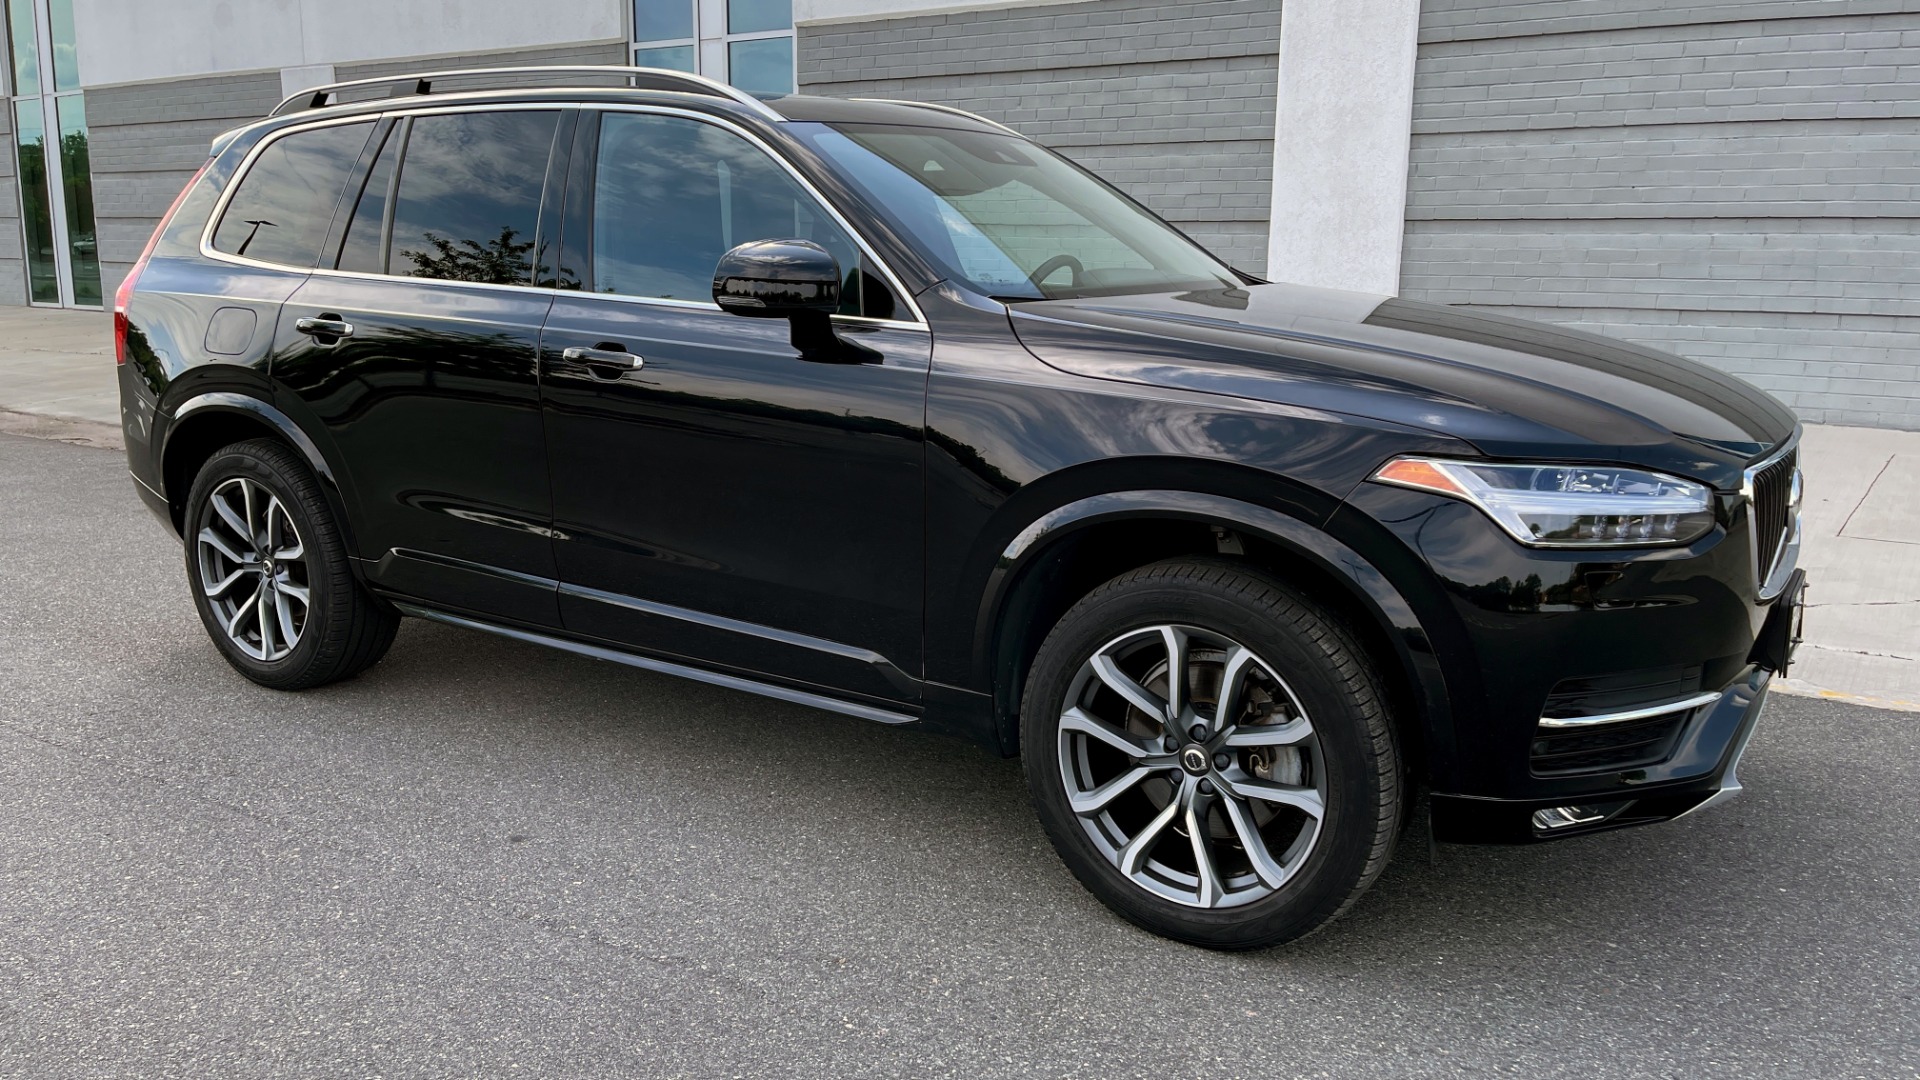 Used 2018 Volvo XC90 T5 AWD MOMENTUM PLUS / NAV / SUNROOF / 3-ROW / REARVIEW for sale Sold at Formula Imports in Charlotte NC 28227 5